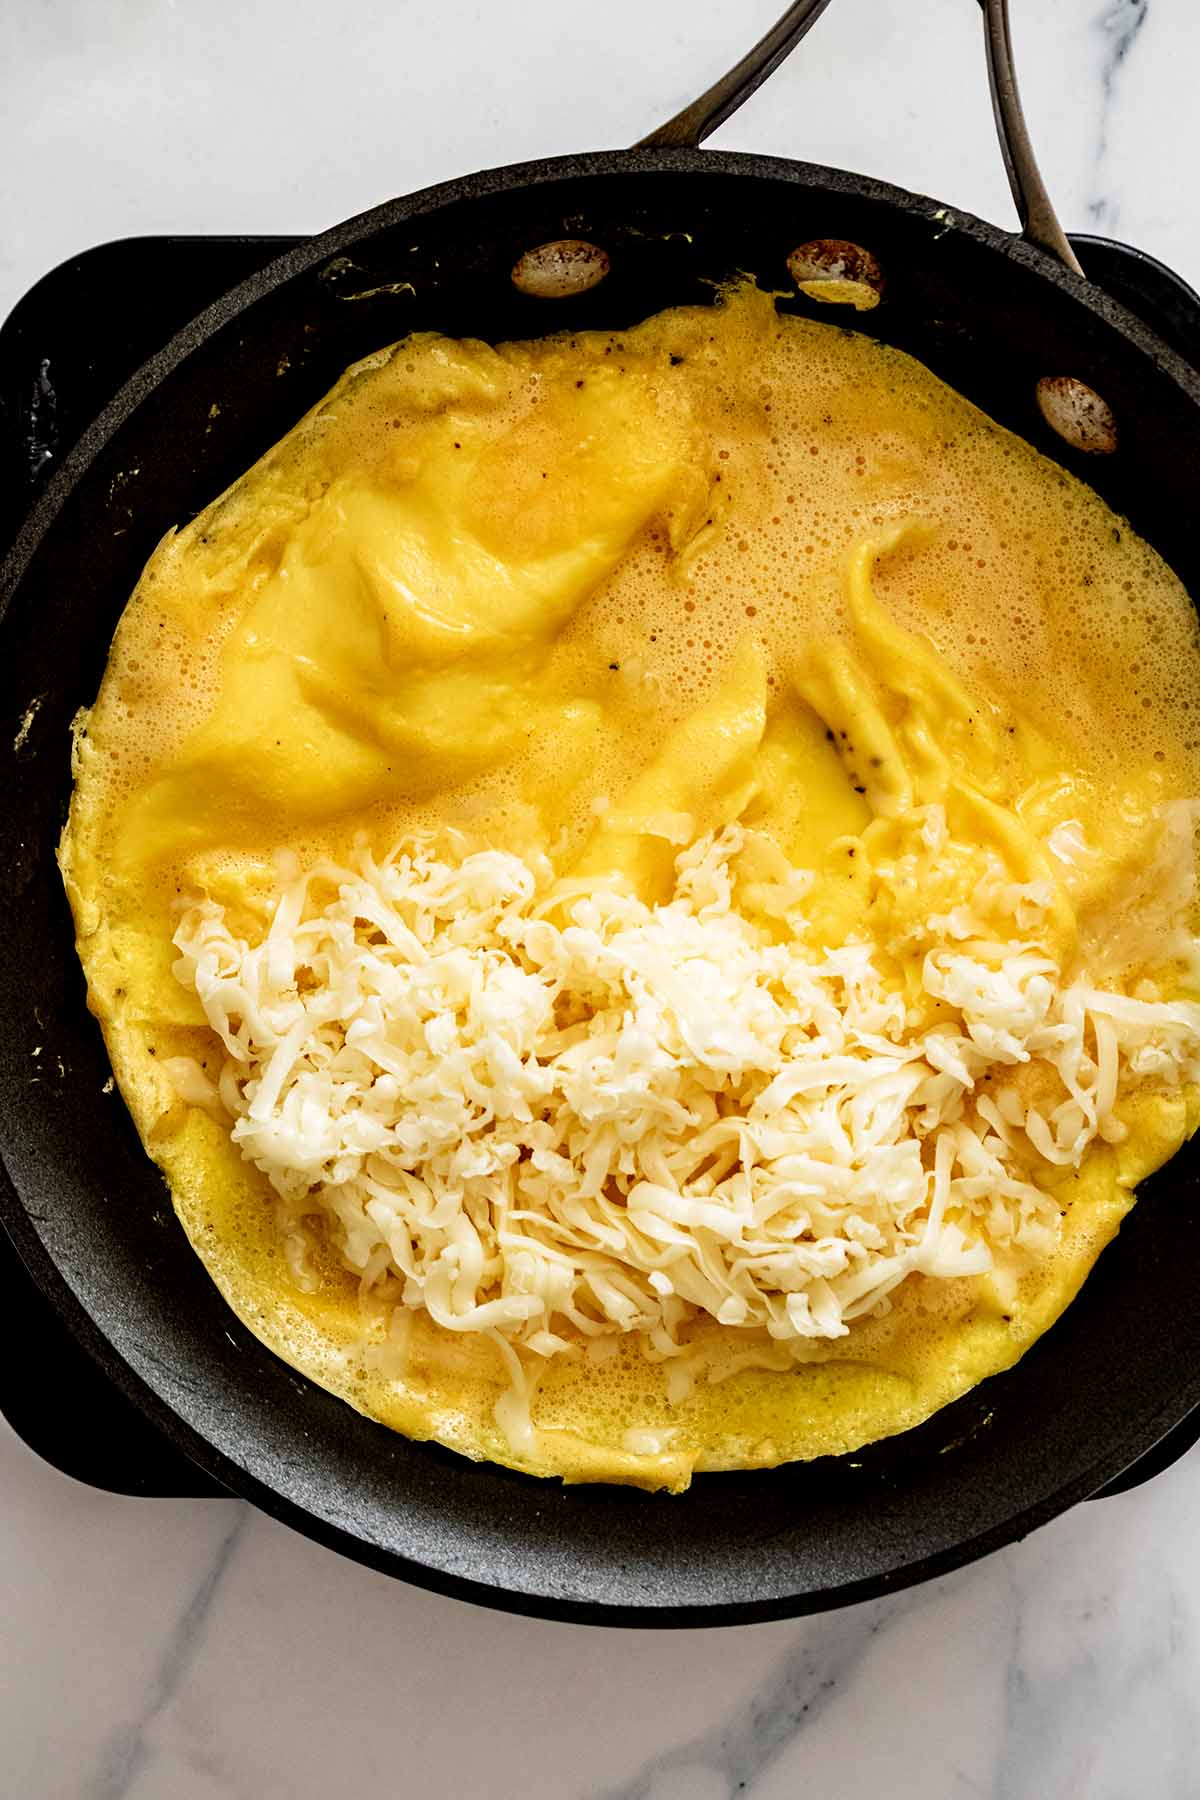 Semi-cooked omelette in a skillet with shredded fontina cheese added to one half of omelette